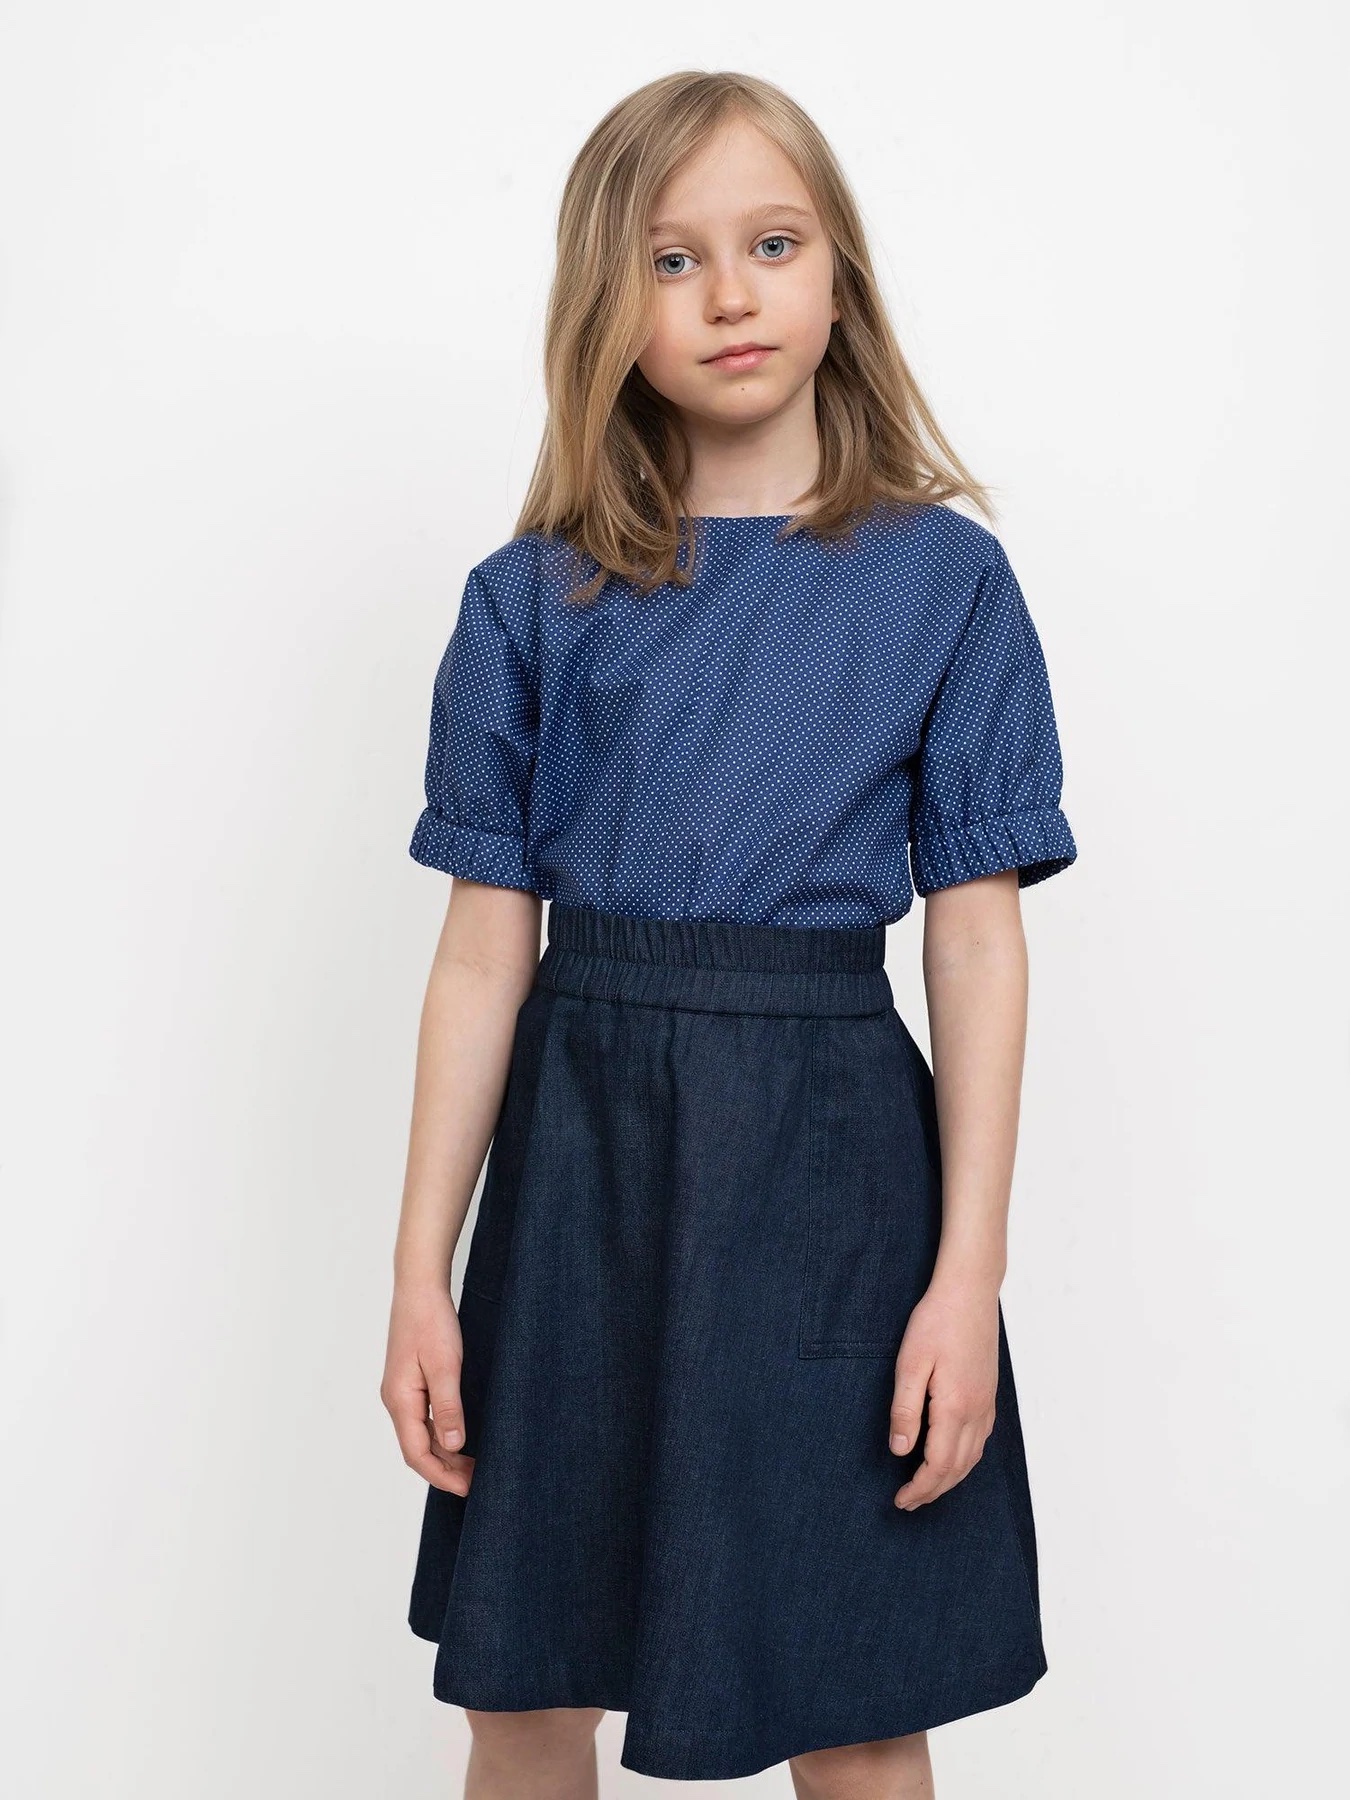 Child wearing the Children's Elastic Waist Skirt Mini sewing pattern from The Assembly Line on The Fold Line. A skirt pattern made in light to mid-weight fabrics, featuring an elasticated waistband, relaxed fit, large patch pockets and knee length finish.